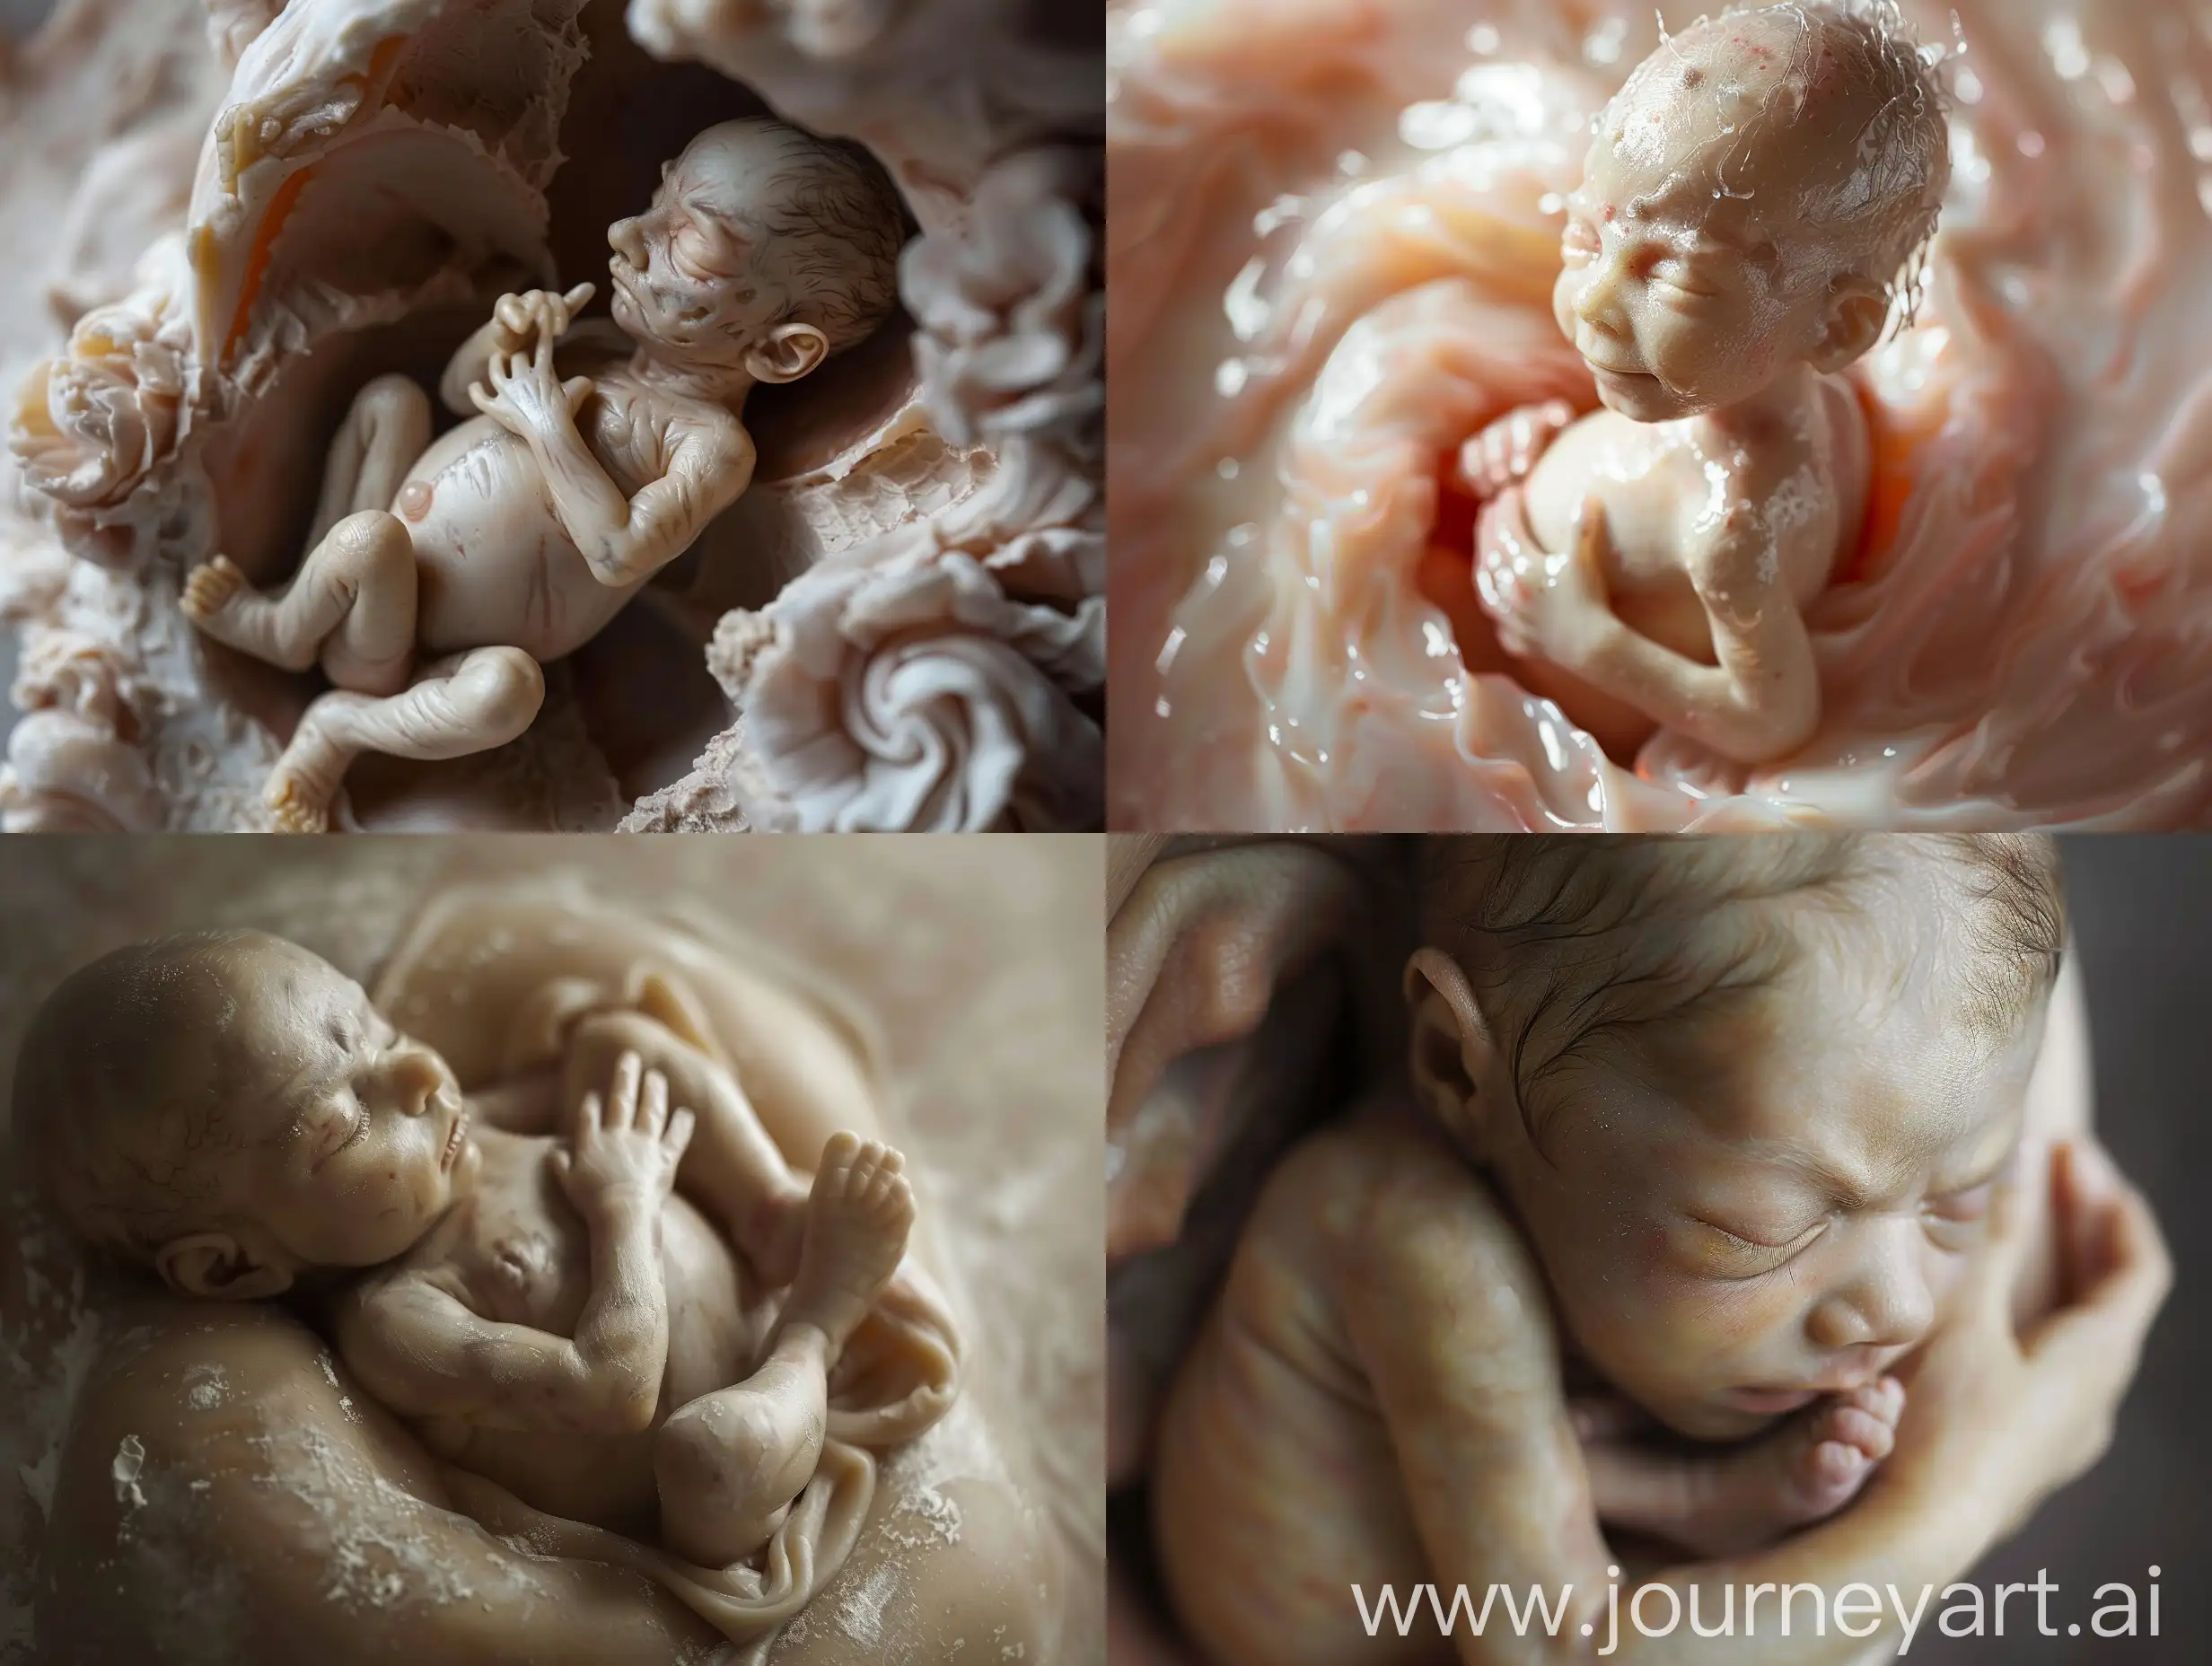 Intricate-Prenatal-Portrait-Realistic-Image-of-Fetus-in-Mothers-Womb